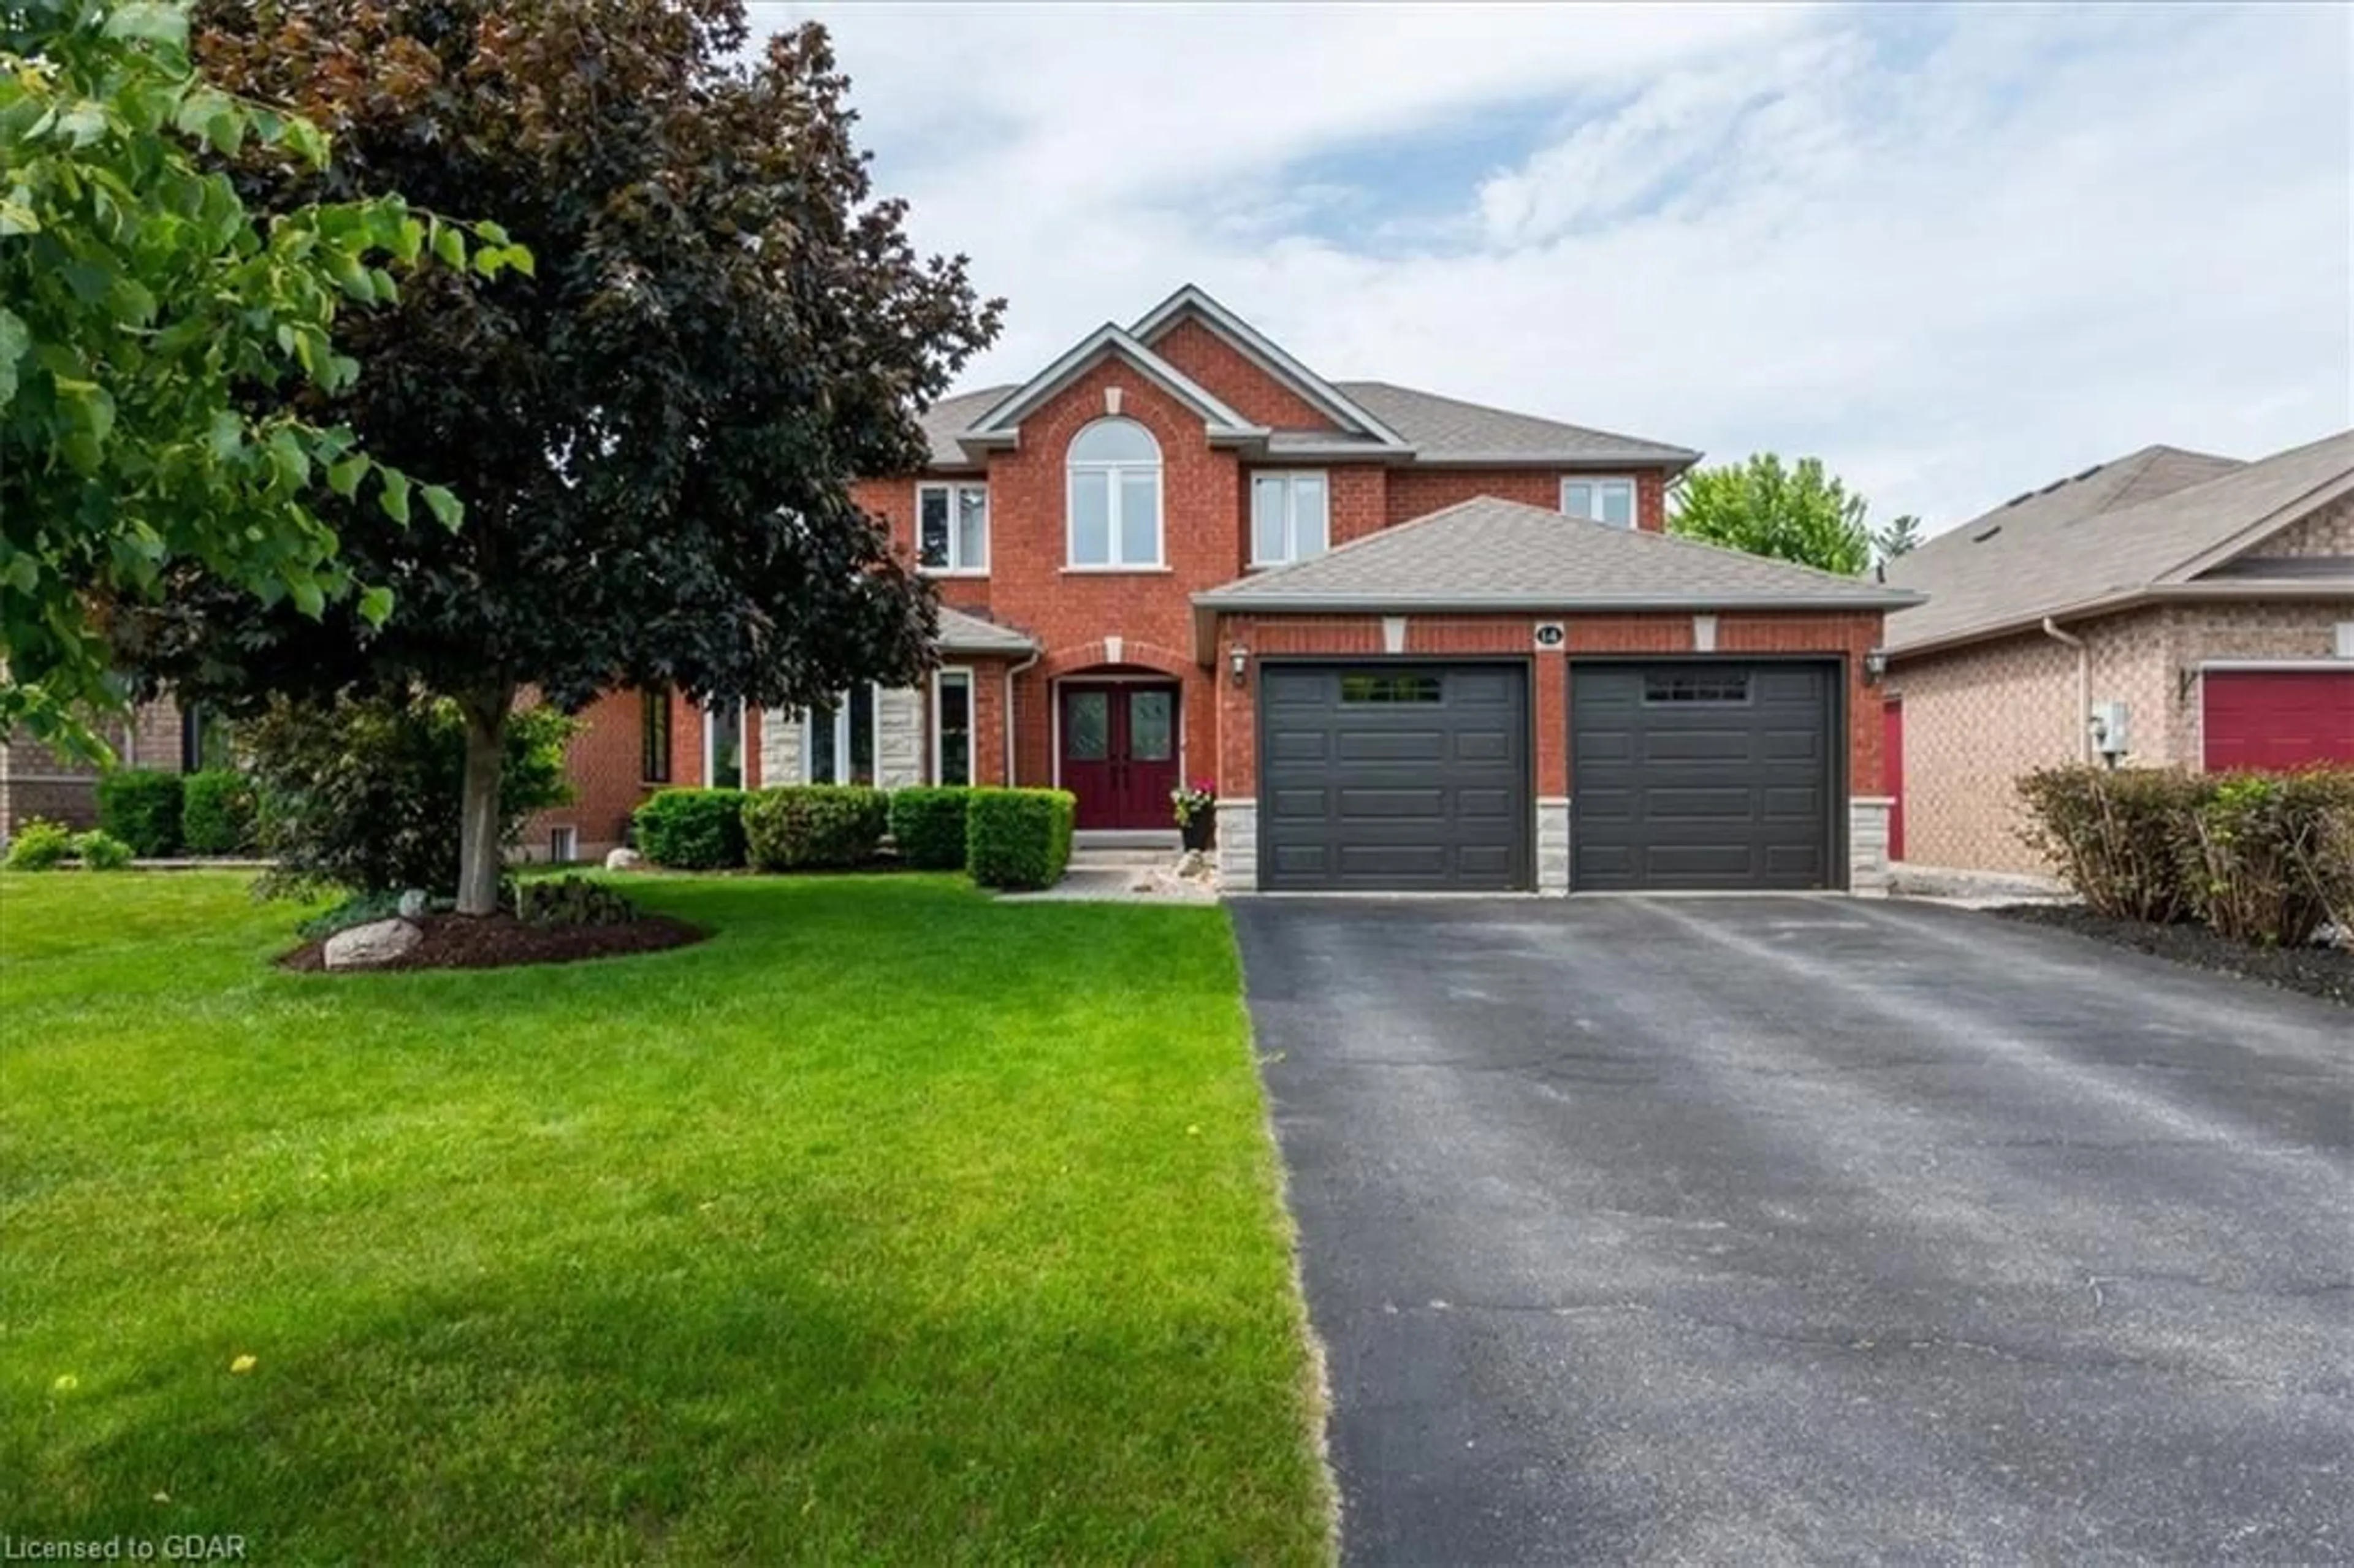 Home with brick exterior material for 14 Bluewater Trail, Barrie Ontario L4N 0G8